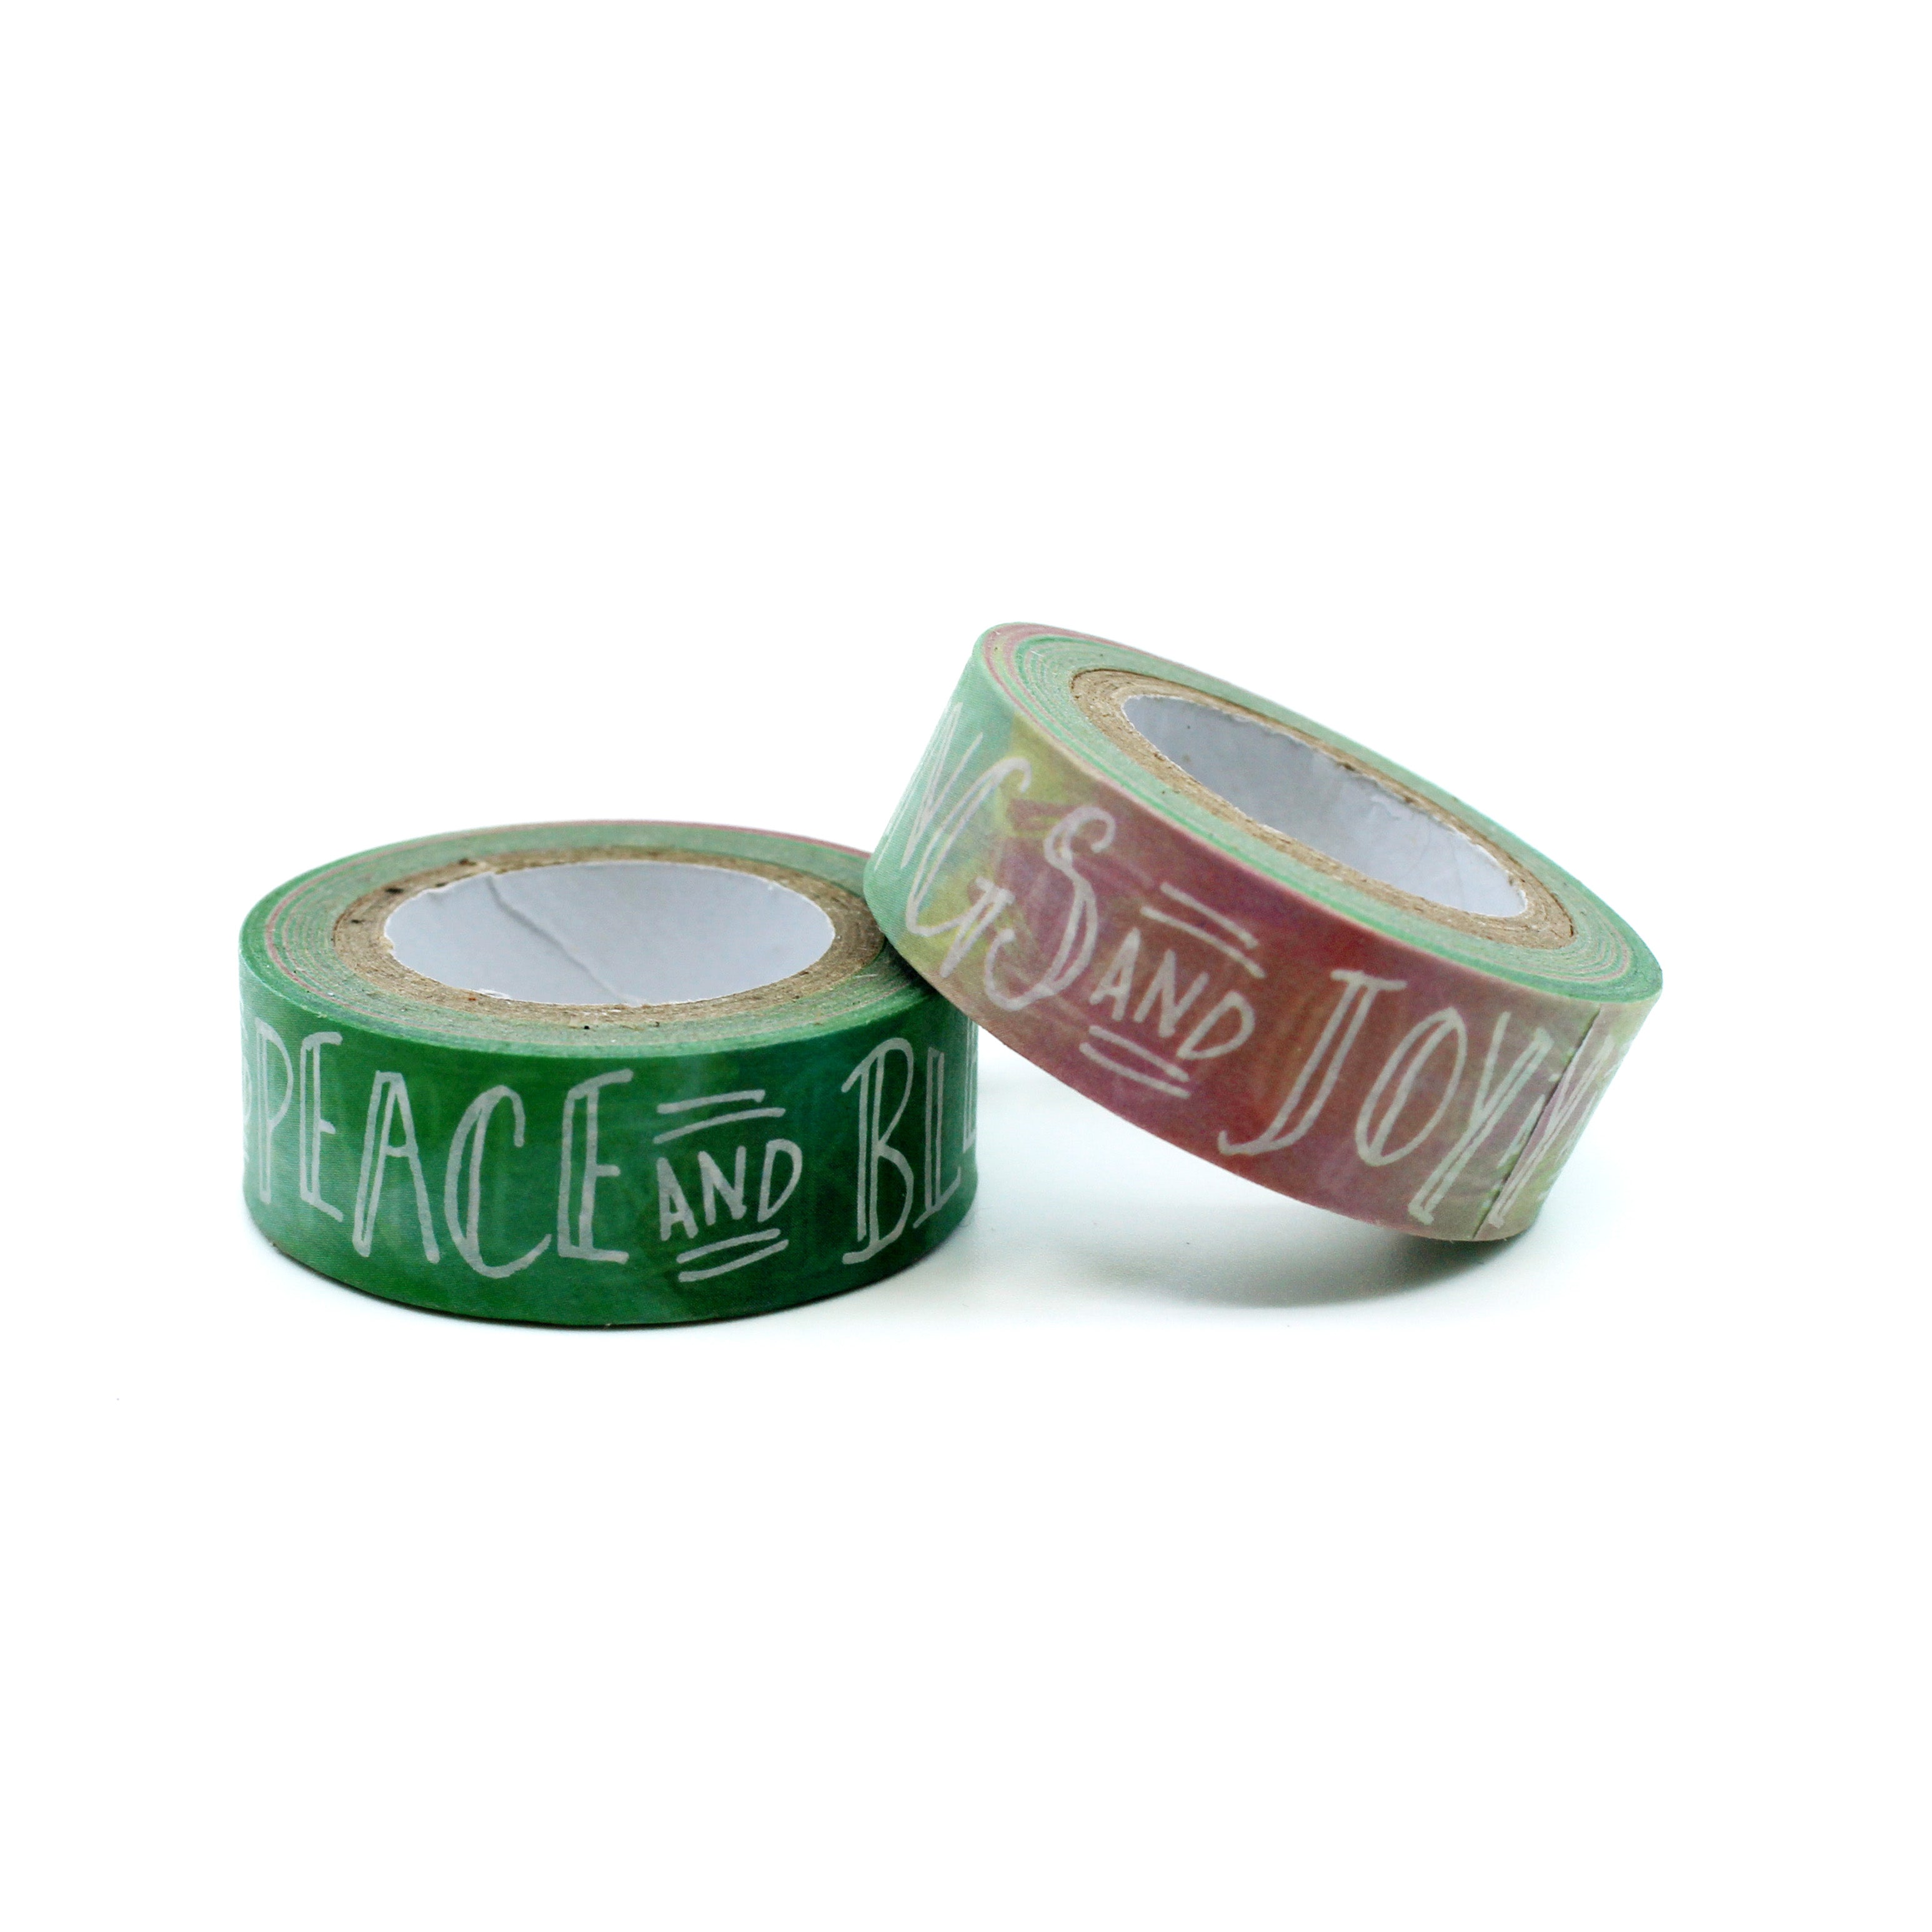 Enhance your Bible journaling experience with our faith-themed washi tape, ideal for adding meaningful and encouraging phrases to your pages, deepening your spiritual reflection. This tape is sold at BBB Supplies Craft Shop.